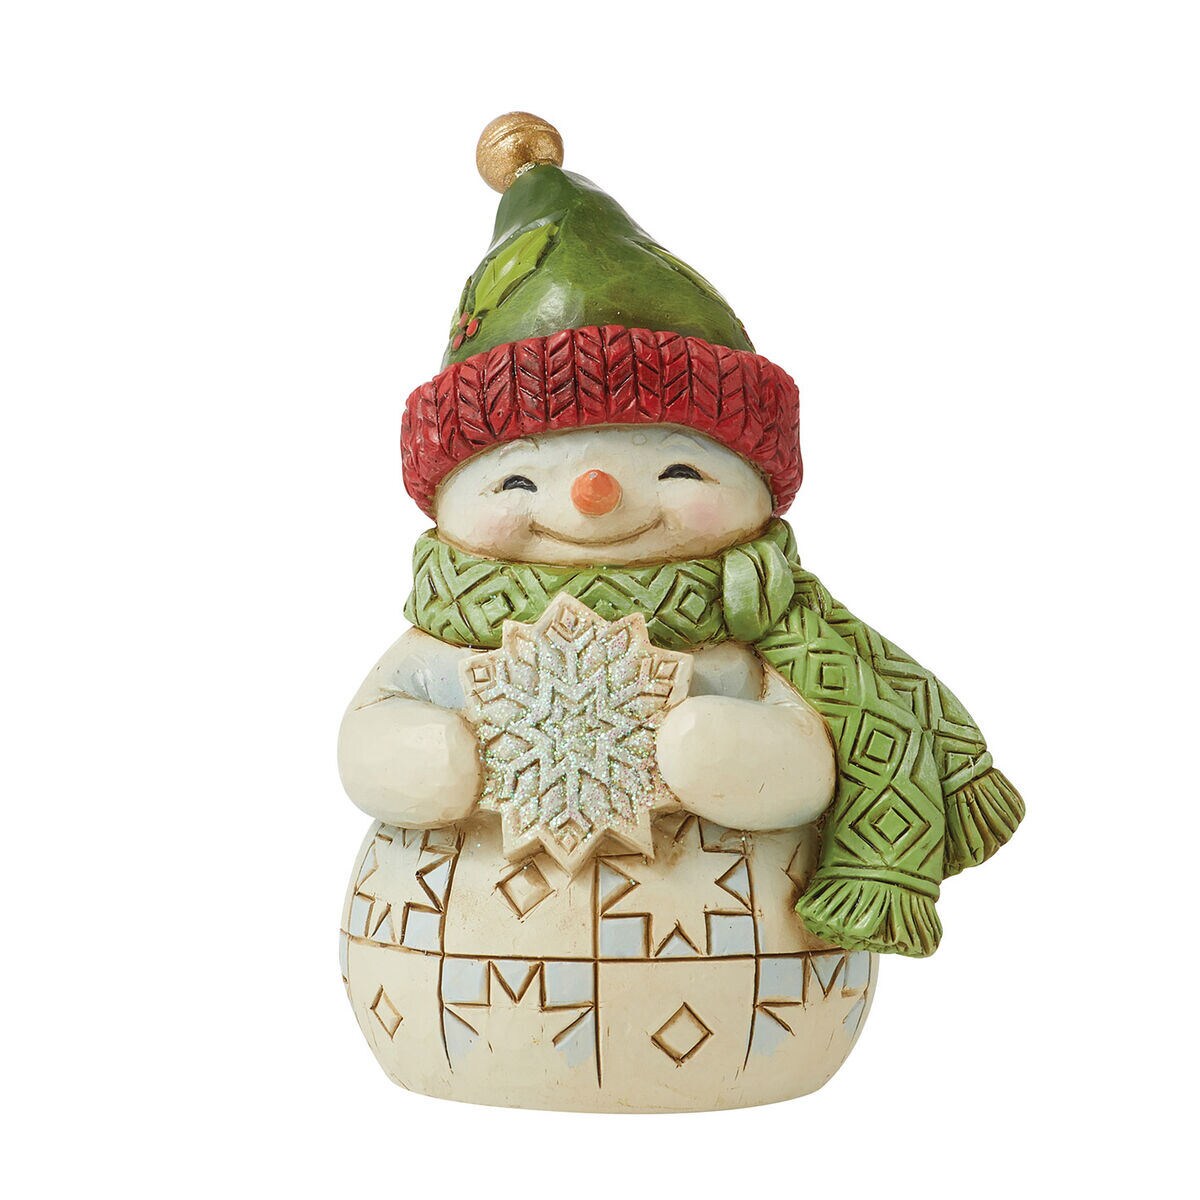 Indoor Decor Cute Figurines Christmas Gift For Family And Friends